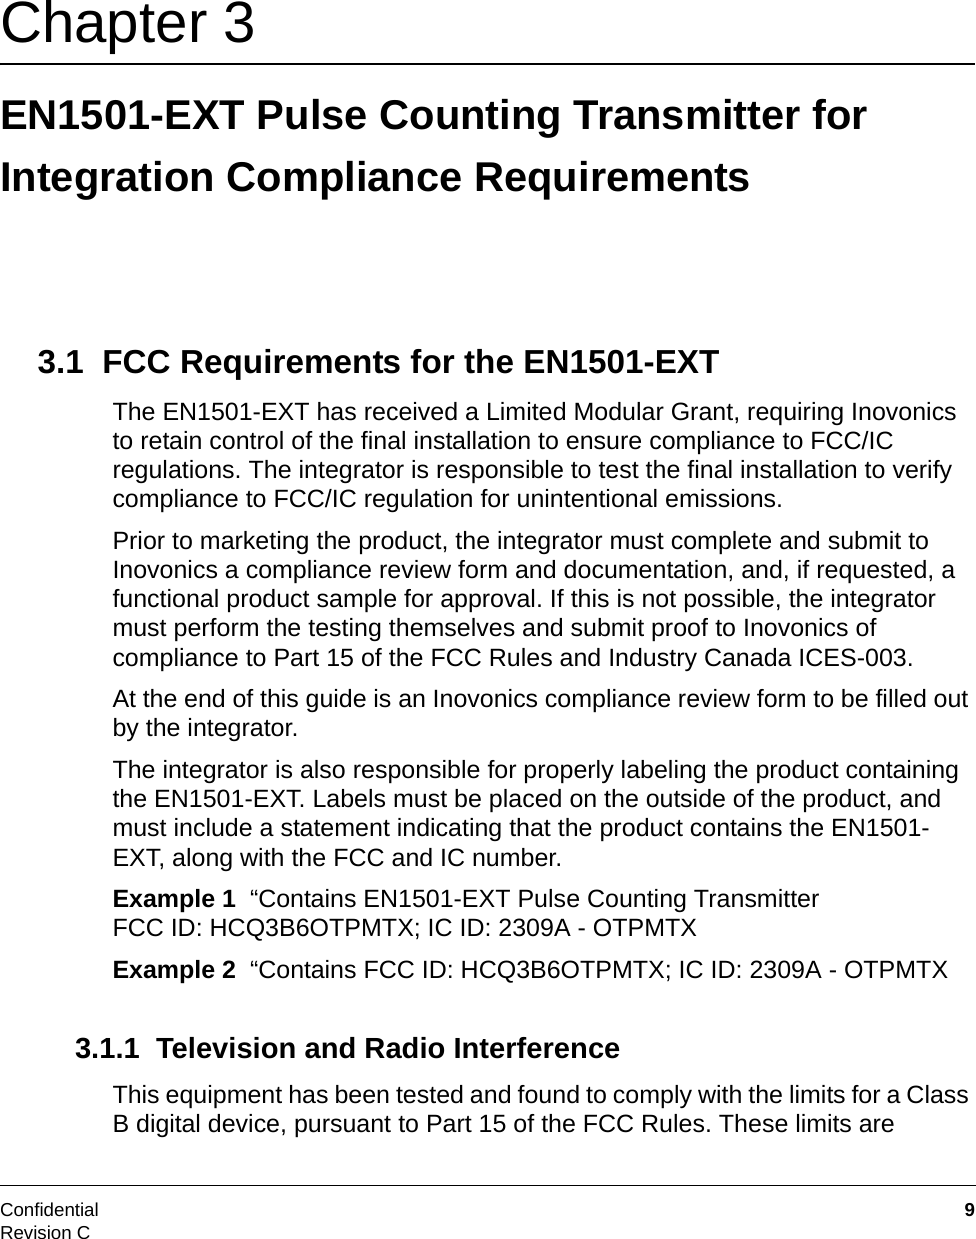 Confidential  9Revision CChapter 3 EN1501-EXT Pulse Counting Transmitter for Integration Compliance Requirements3.1  FCC Requirements for the EN1501-EXTThe EN1501-EXT has received a Limited Modular Grant, requiring Inovonics to retain control of the final installation to ensure compliance to FCC/IC regulations. The integrator is responsible to test the final installation to verify compliance to FCC/IC regulation for unintentional emissions.Prior to marketing the product, the integrator must complete and submit to Inovonics a compliance review form and documentation, and, if requested, a functional product sample for approval. If this is not possible, the integrator must perform the testing themselves and submit proof to Inovonics of compliance to Part 15 of the FCC Rules and Industry Canada ICES-003. At the end of this guide is an Inovonics compliance review form to be filled out by the integrator.The integrator is also responsible for properly labeling the product containing the EN1501-EXT. Labels must be placed on the outside of the product, and must include a statement indicating that the product contains the EN1501-EXT, along with the FCC and IC number.Example 1  “Contains EN1501-EXT Pulse Counting Transmitter FCC ID: HCQ3B6OTPMTX; IC ID: 2309A - OTPMTXExample 2  “Contains FCC ID: HCQ3B6OTPMTX; IC ID: 2309A - OTPMTX3.1.1  Television and Radio InterferenceThis equipment has been tested and found to comply with the limits for a Class B digital device, pursuant to Part 15 of the FCC Rules. These limits are 